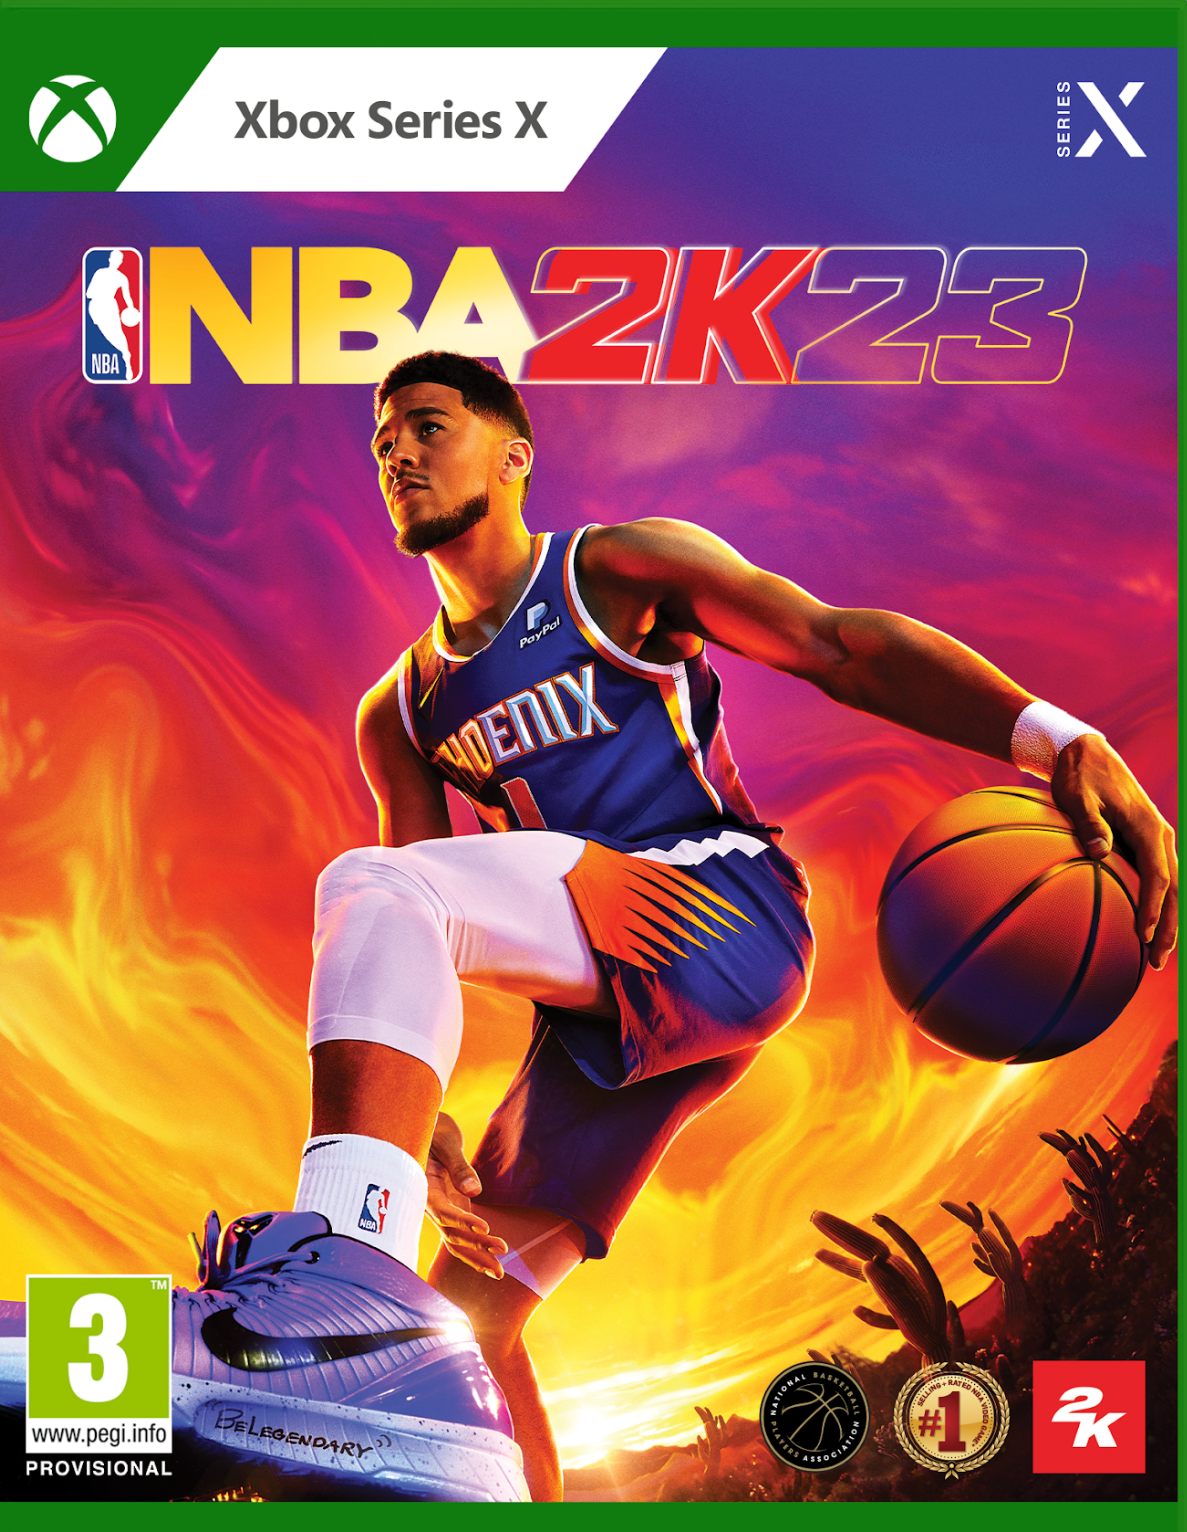 A year-long NBA League Pass subscription is included with the purchase of  the NBA 2K23 Championship Edition